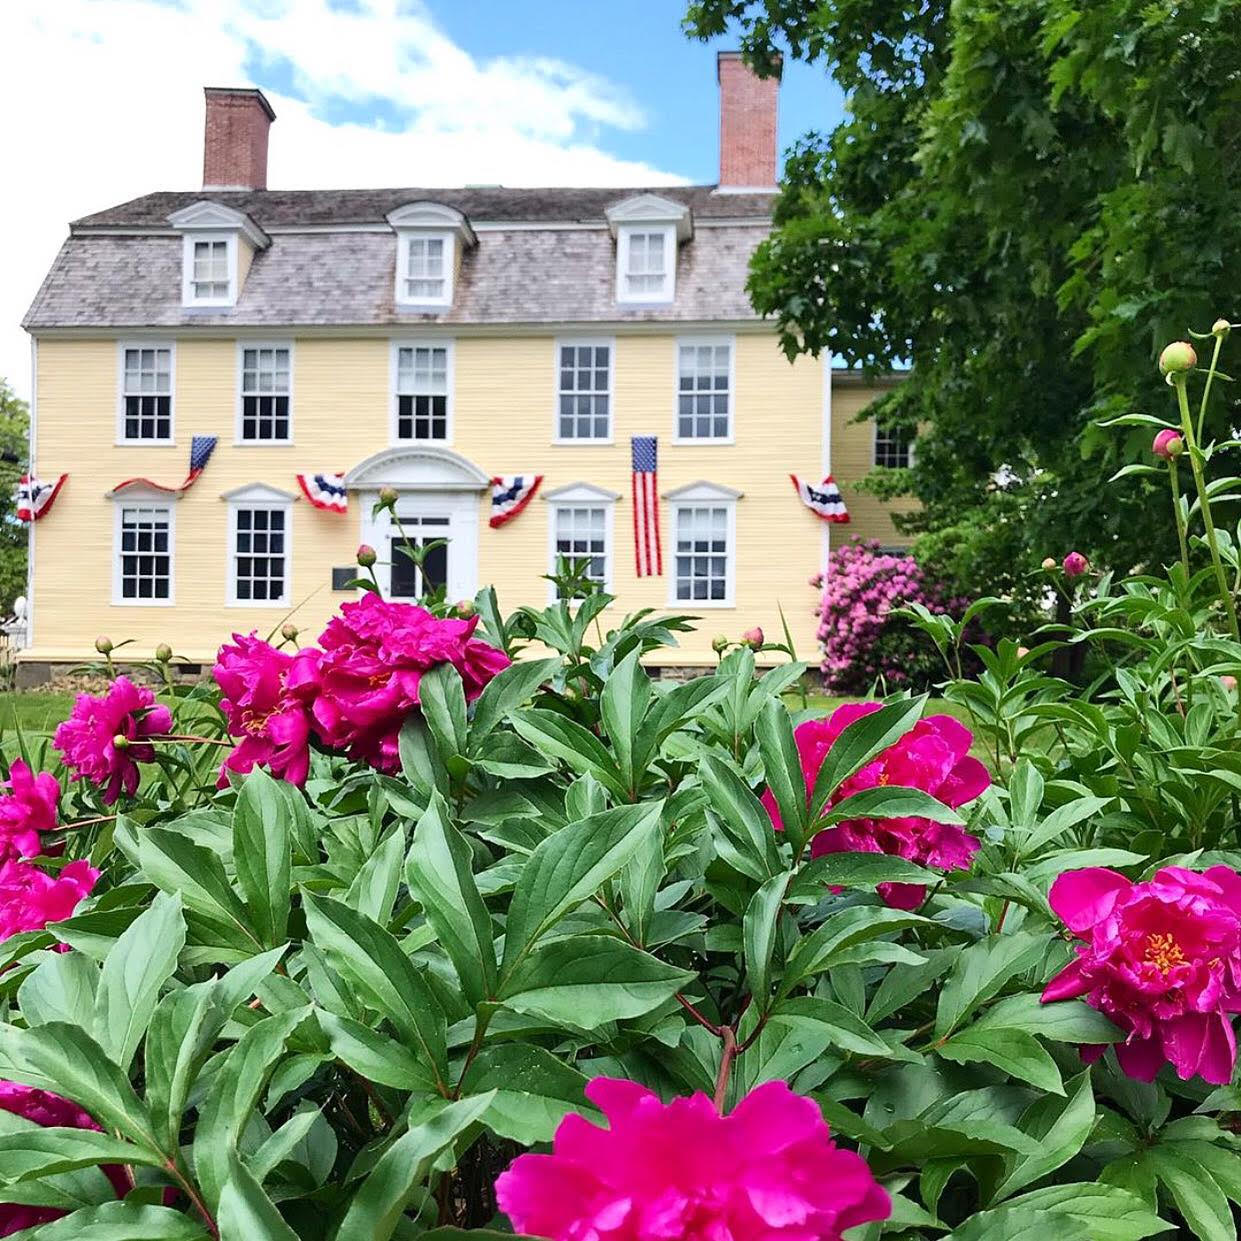 Image of a large yellow Georgian House on a green grass lawn with vibrant pink azalea flowers growing in the forefront